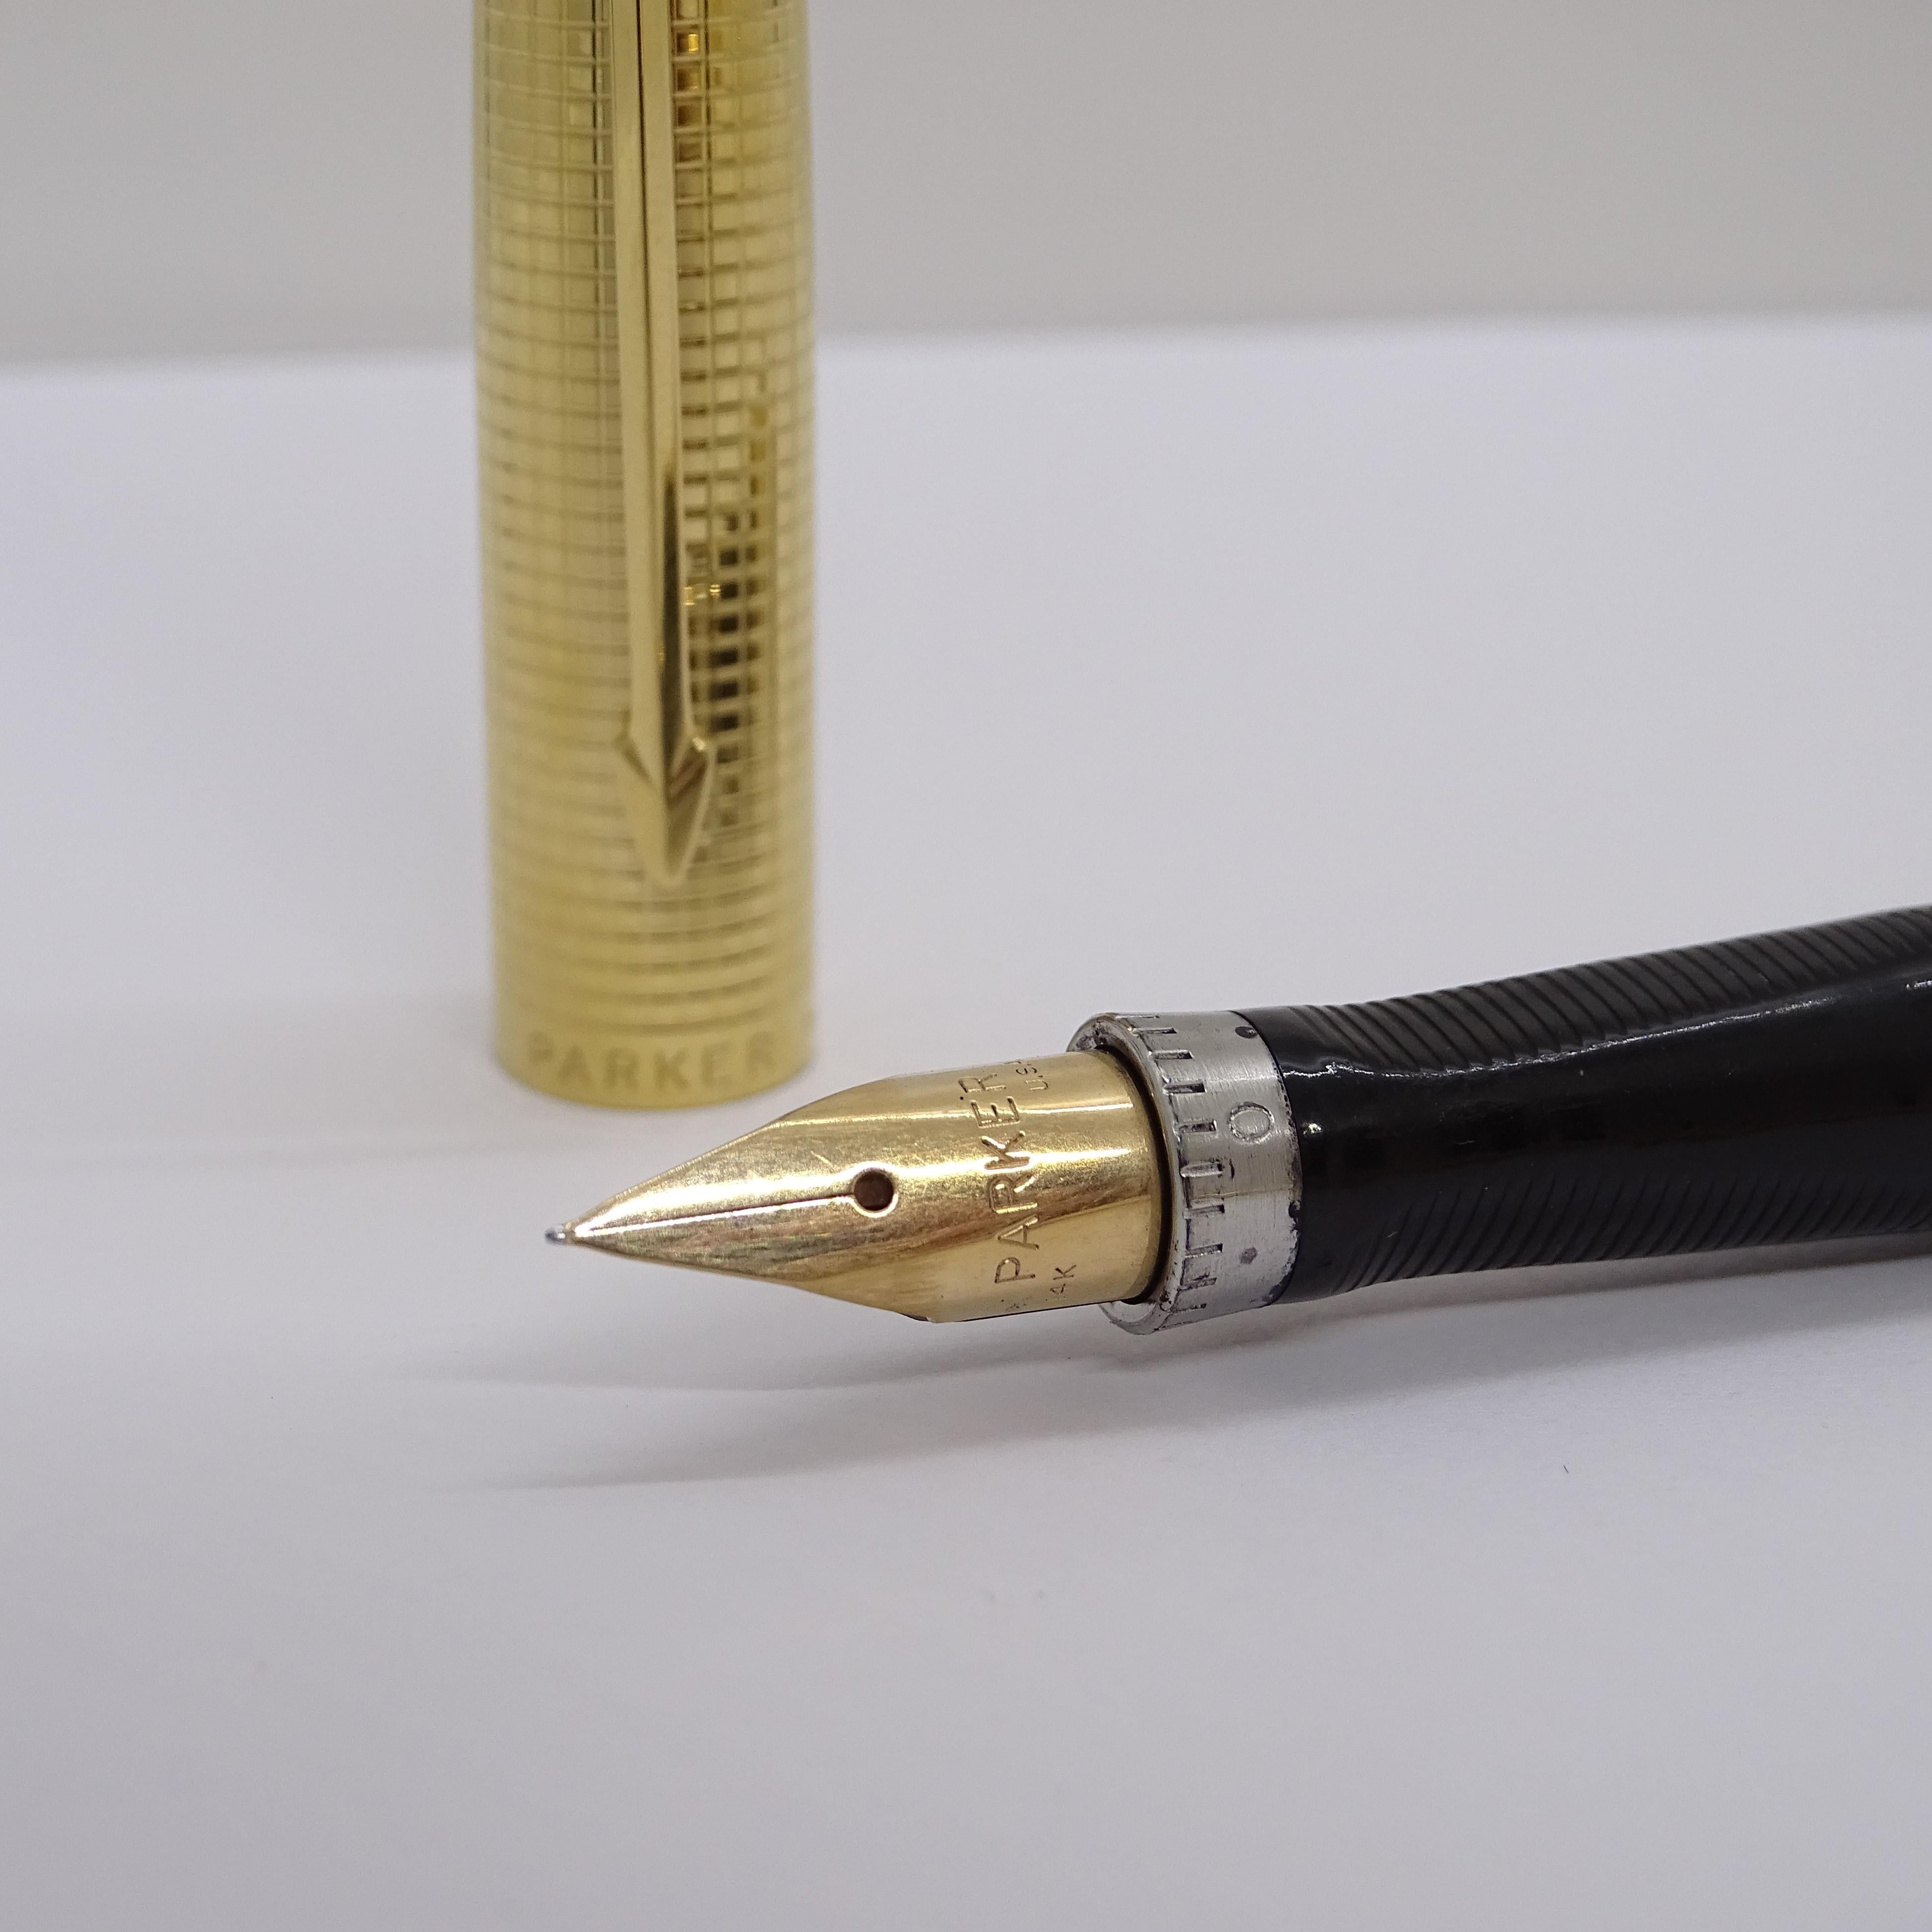 Parker 75 Custom Insignia writing set with case, 14k gold plated, 70's For Sale 9